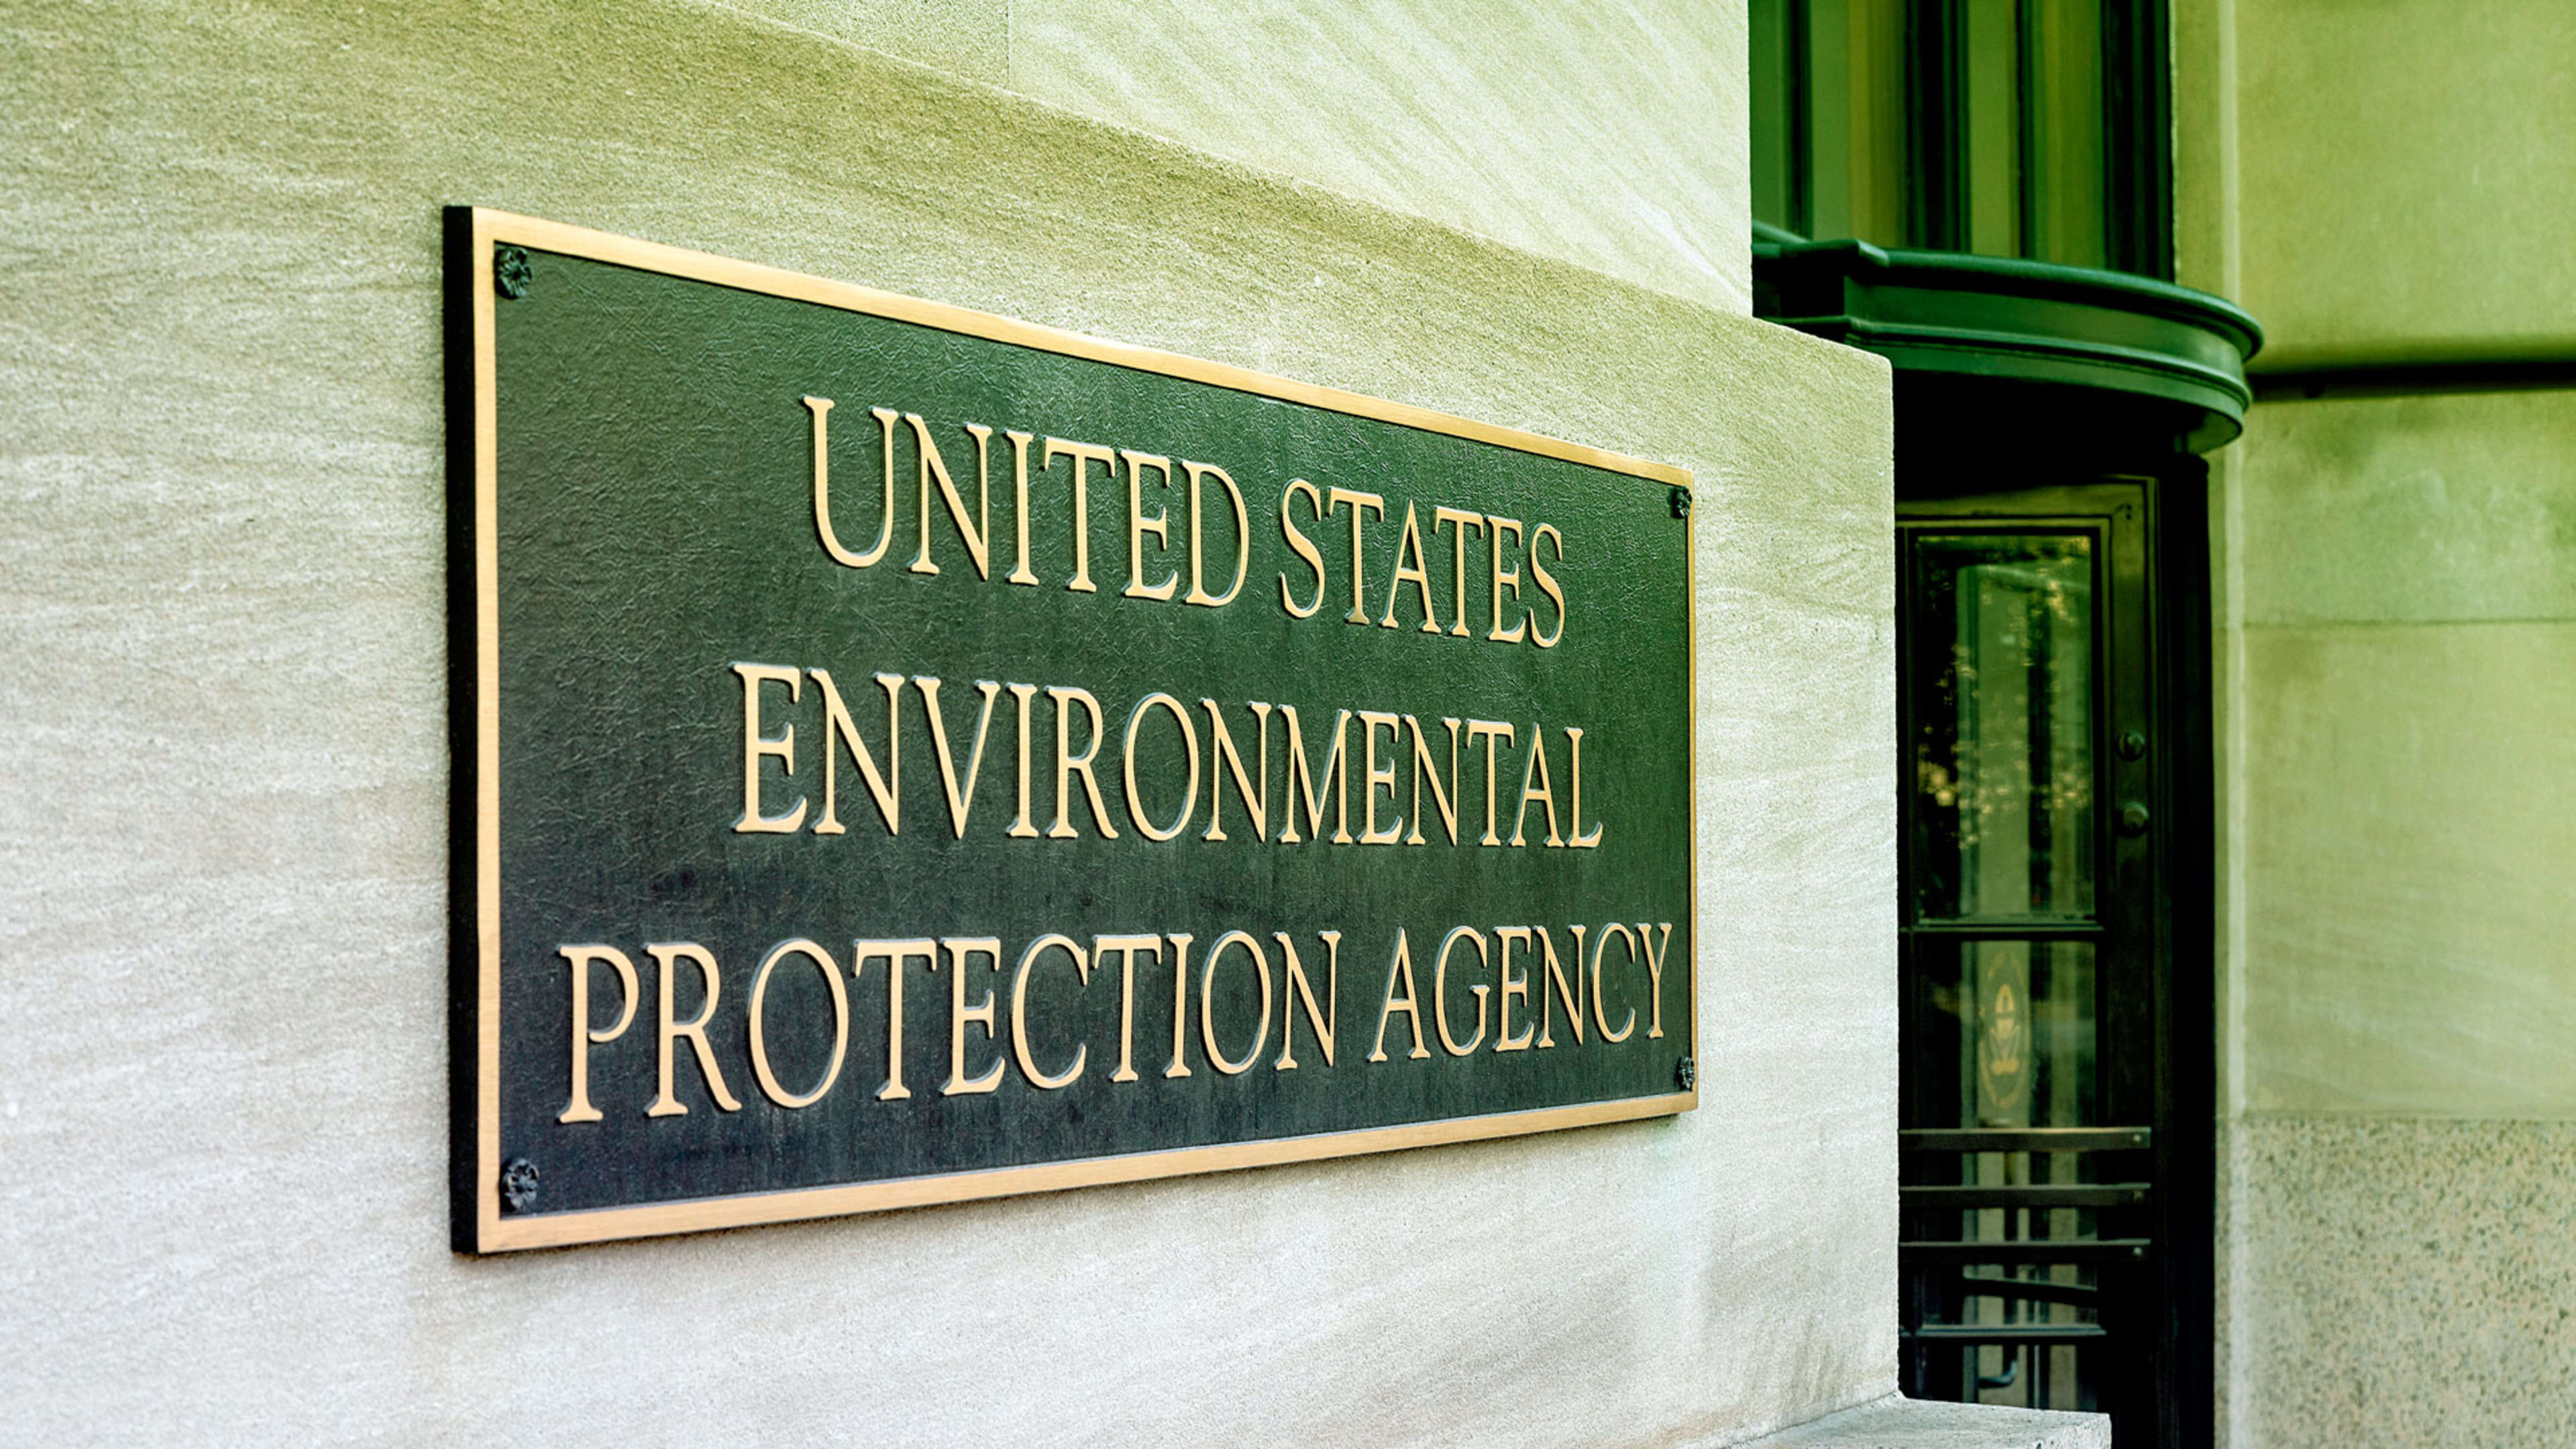 Mother Nature’s revenge: The EPA’s office is reportedly leaking sewage